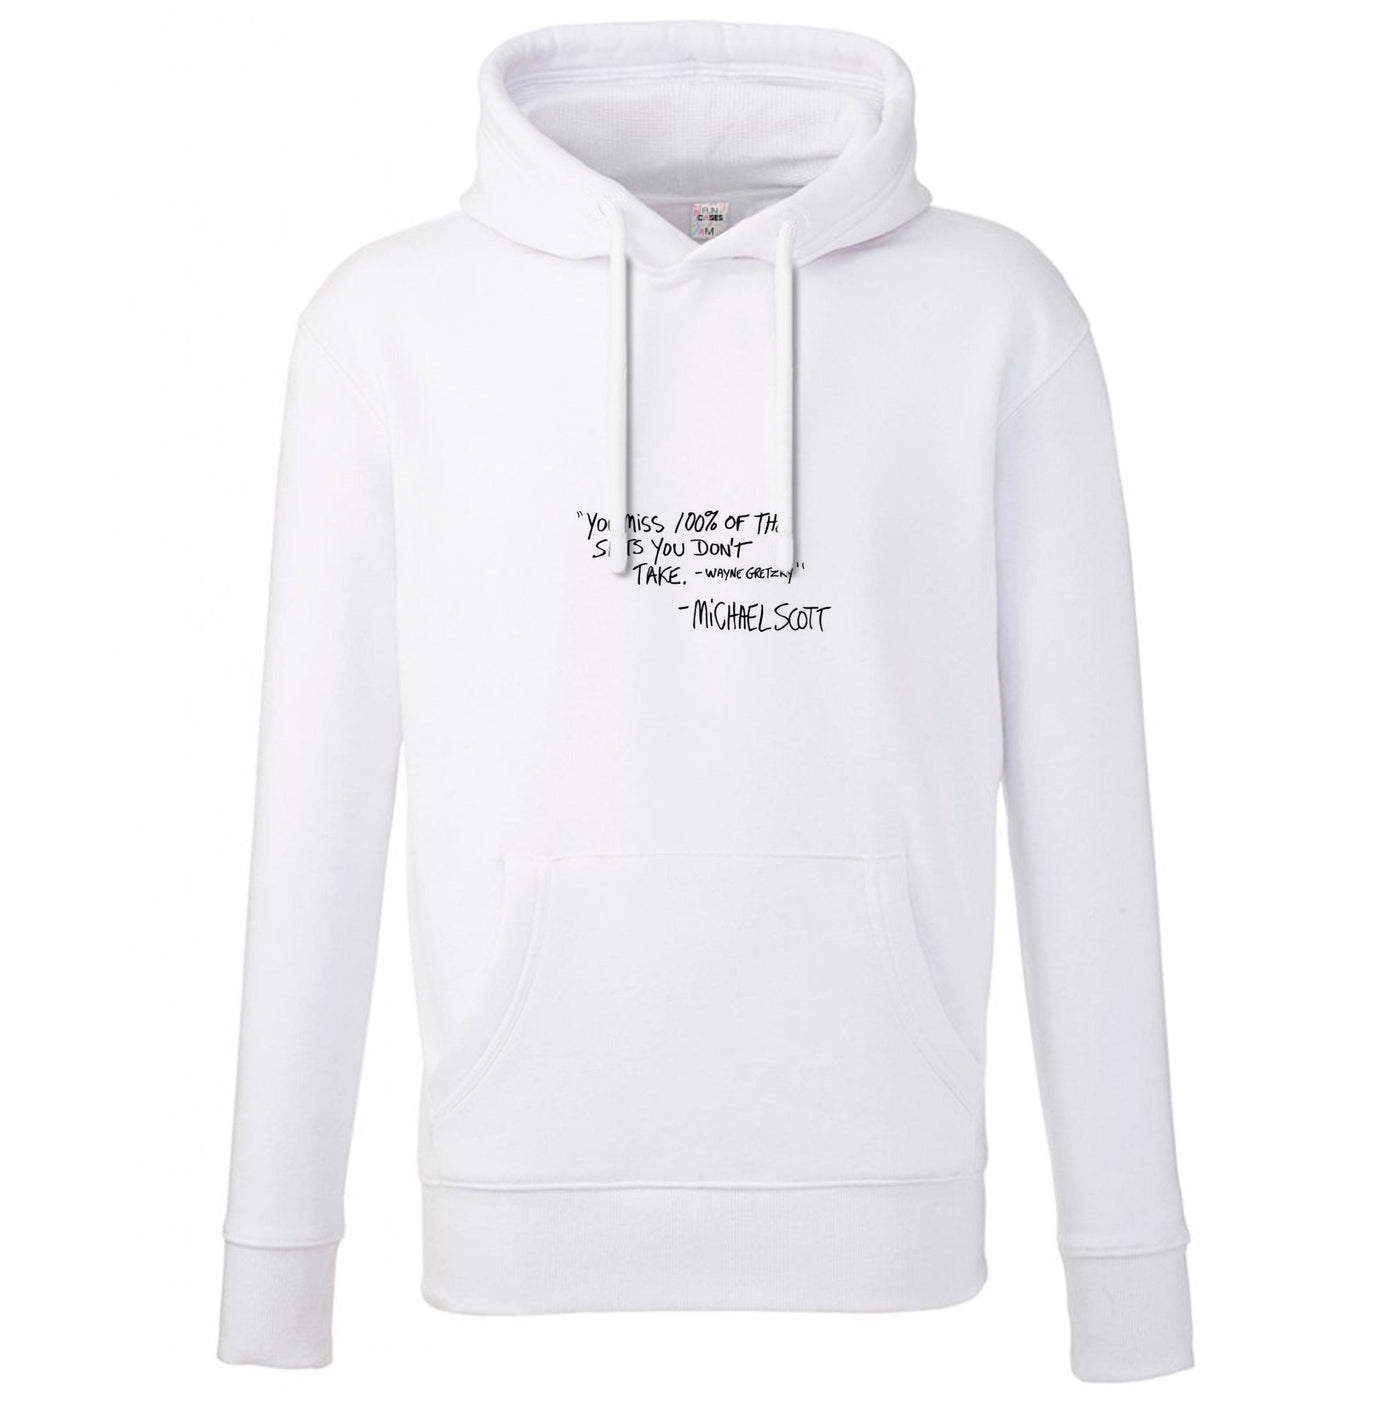 Michael Scott Quote - The Office Hoodie